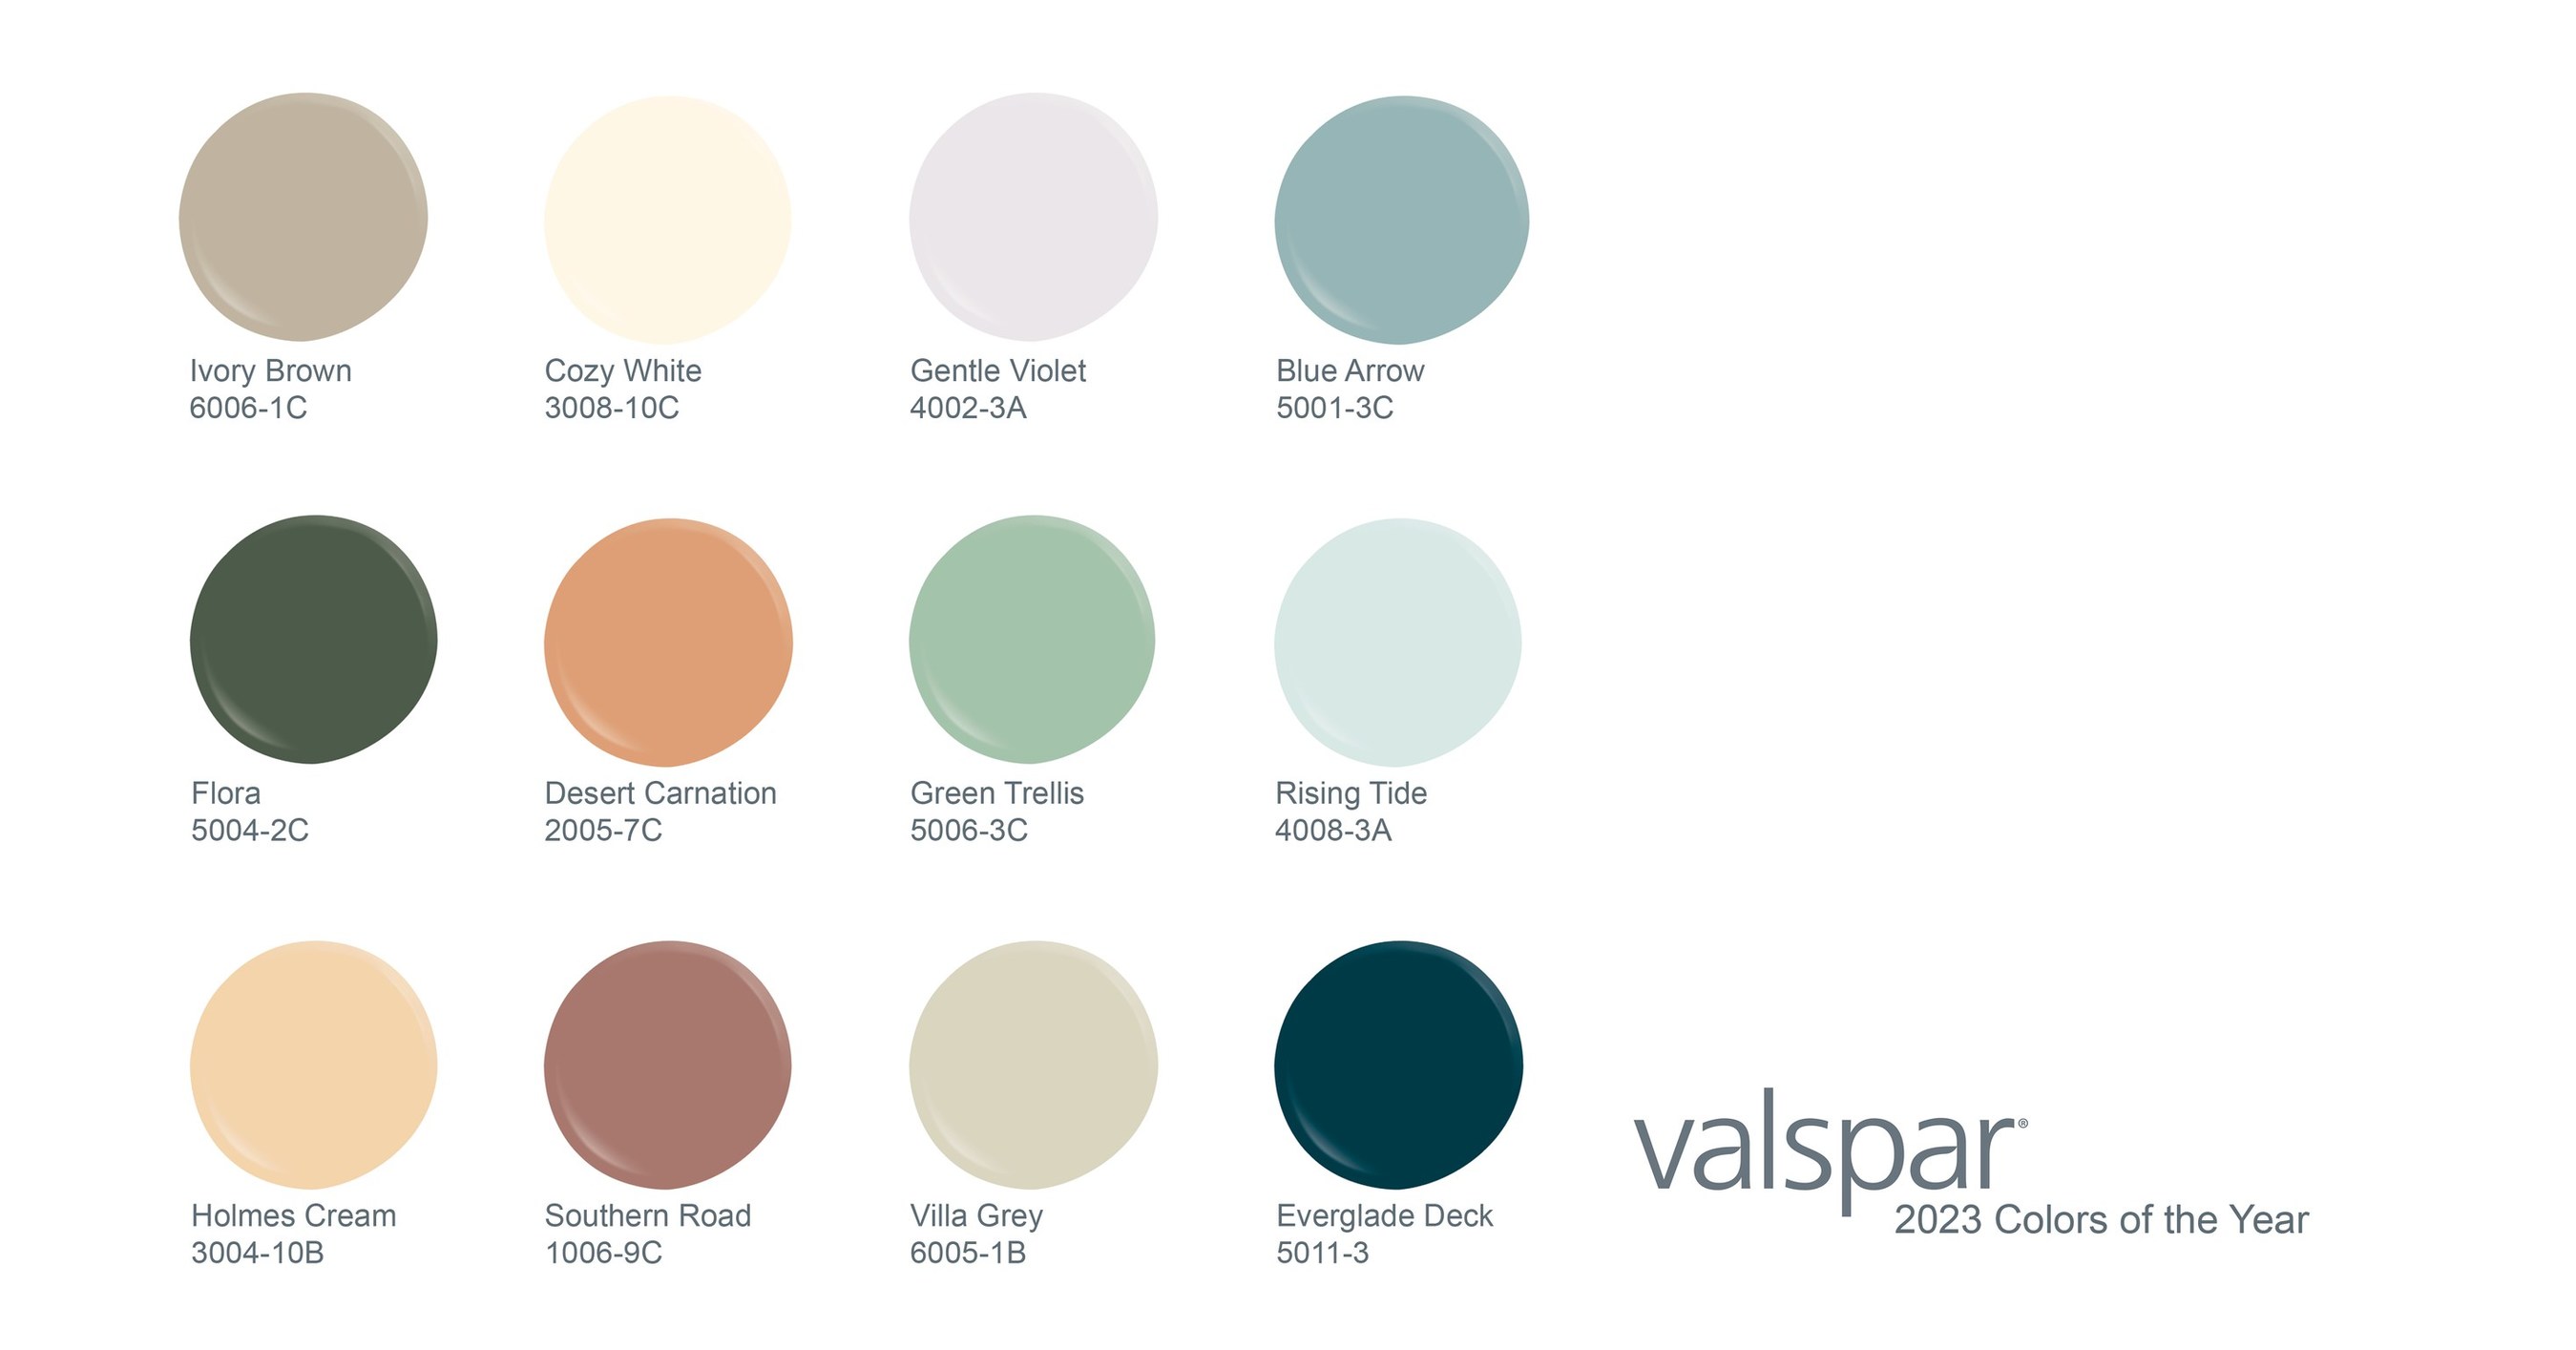 valspar-reveals-fresh-lineup-of-new-shades-in-2023-colors-of-the-year